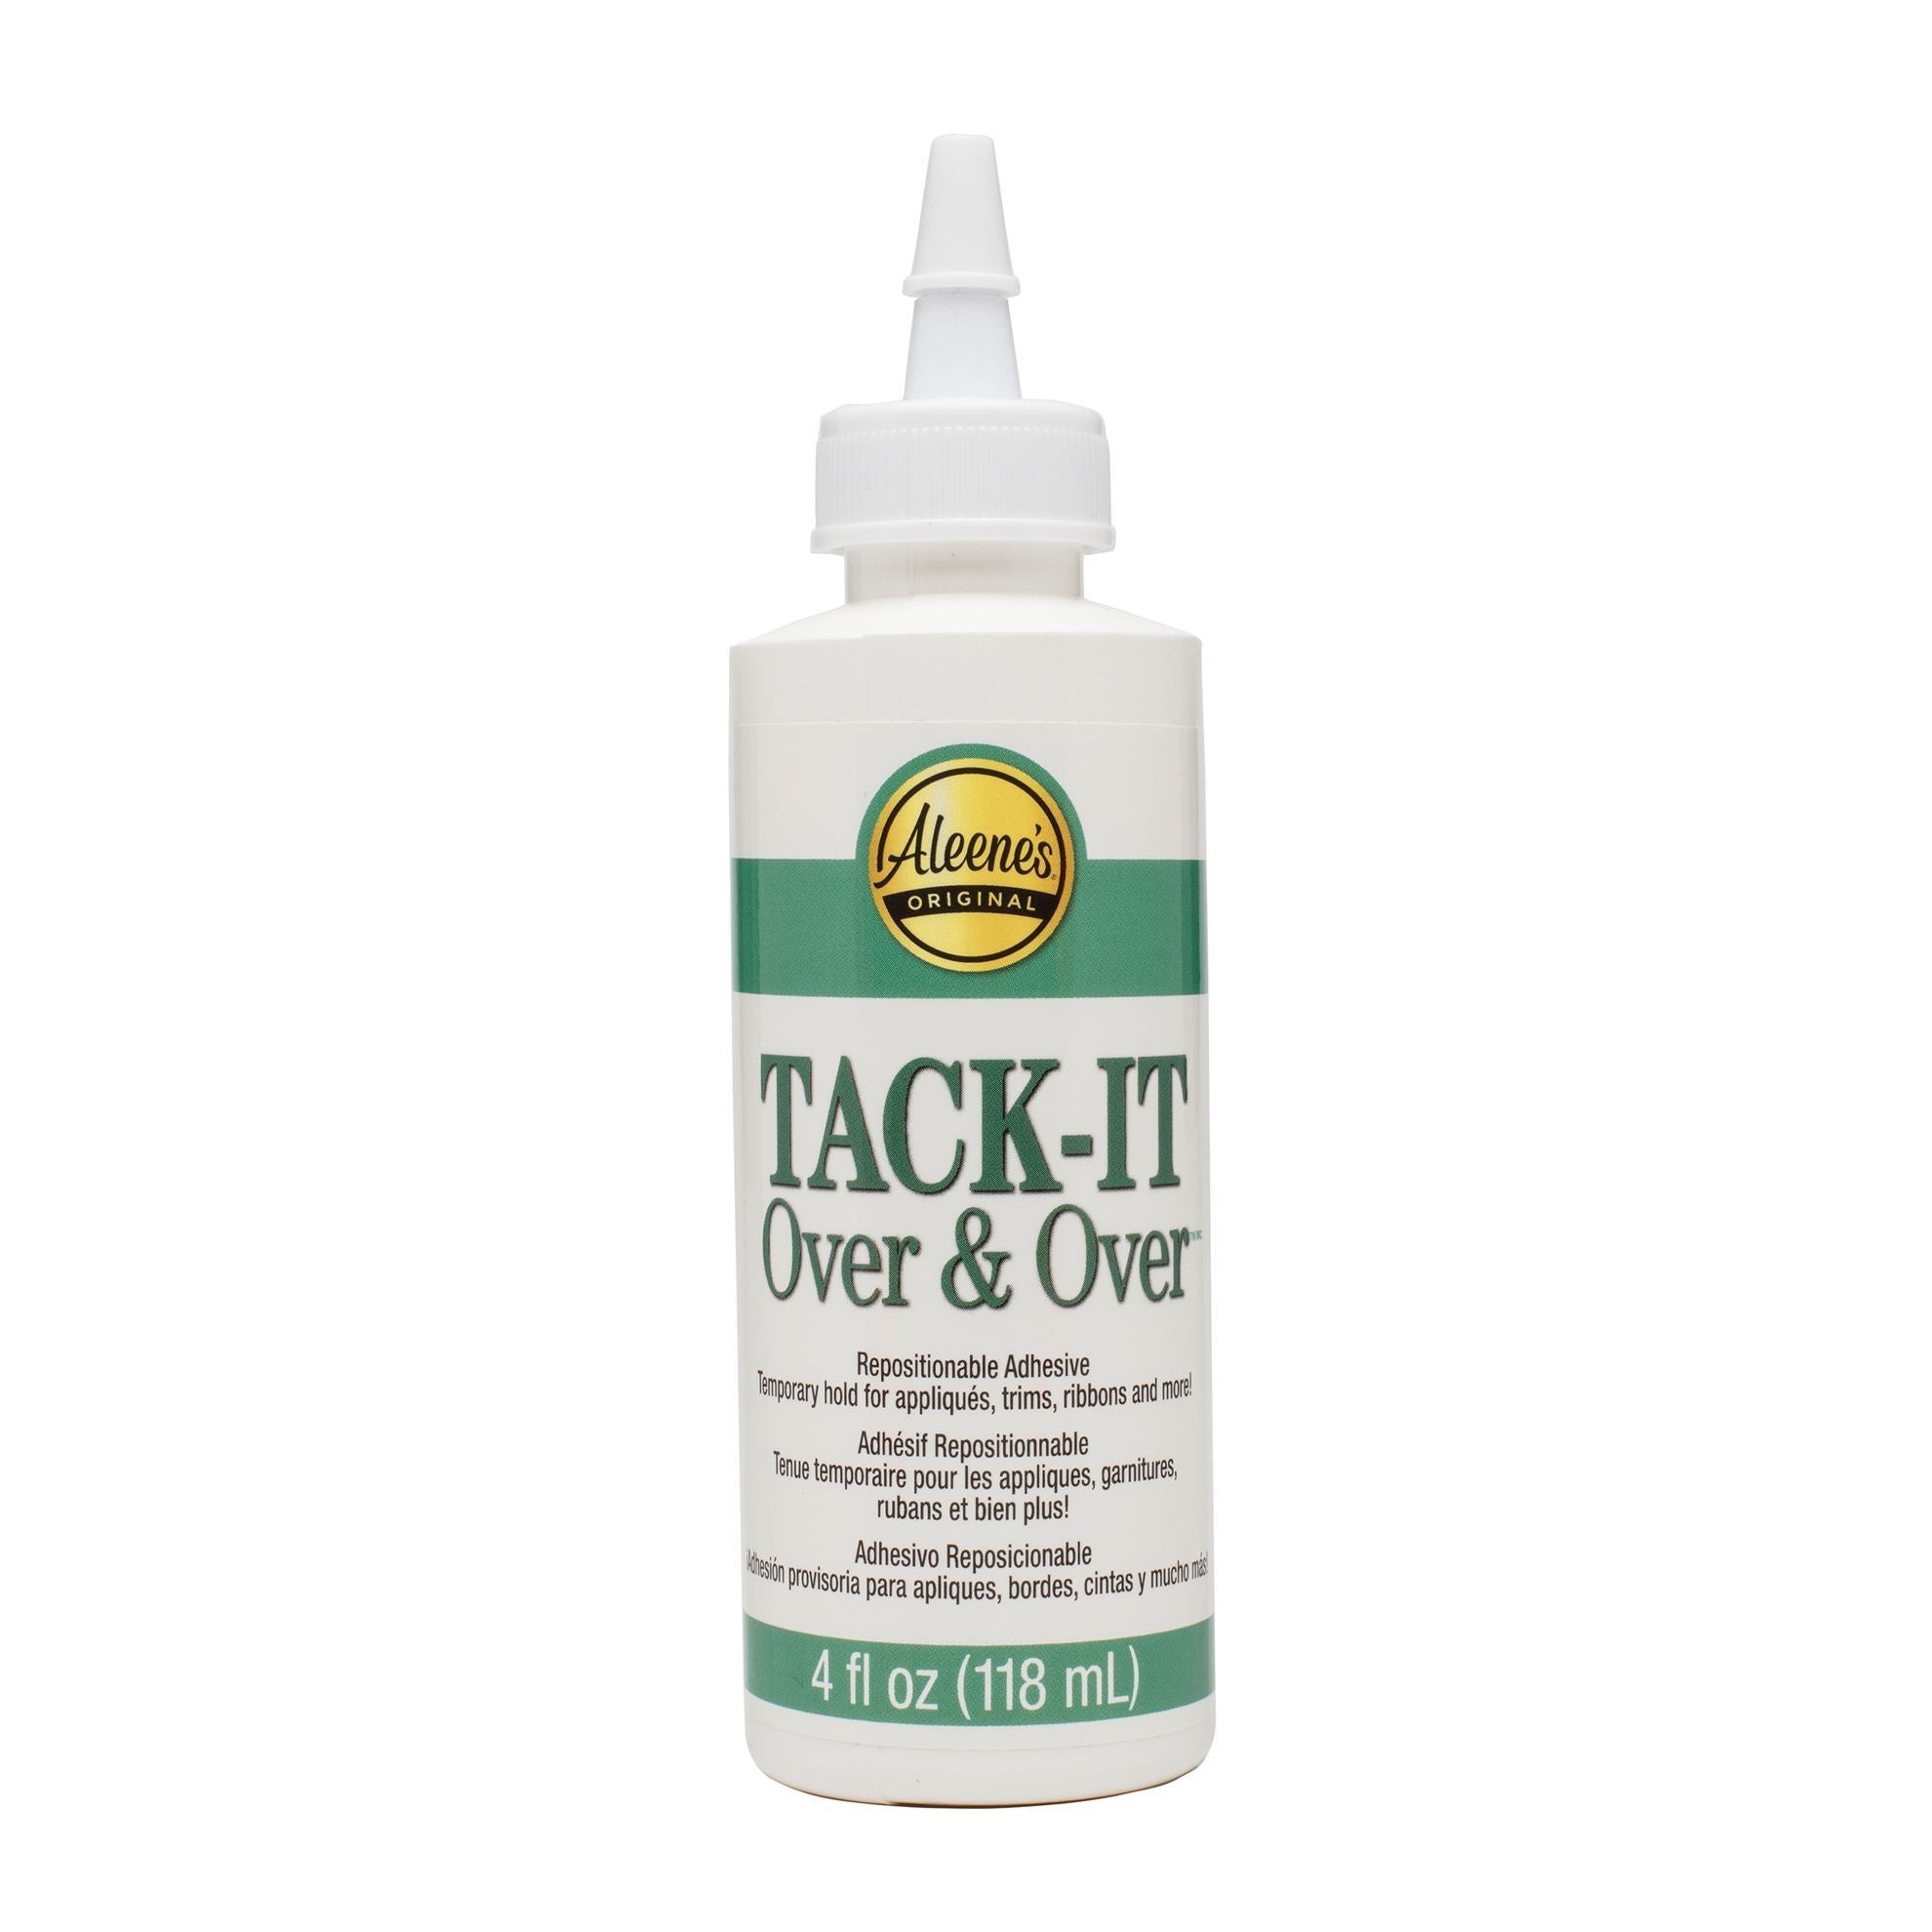 Tack-It (Over and Over), Repositionable Adhesive, 4 fl oz., Aleene's®